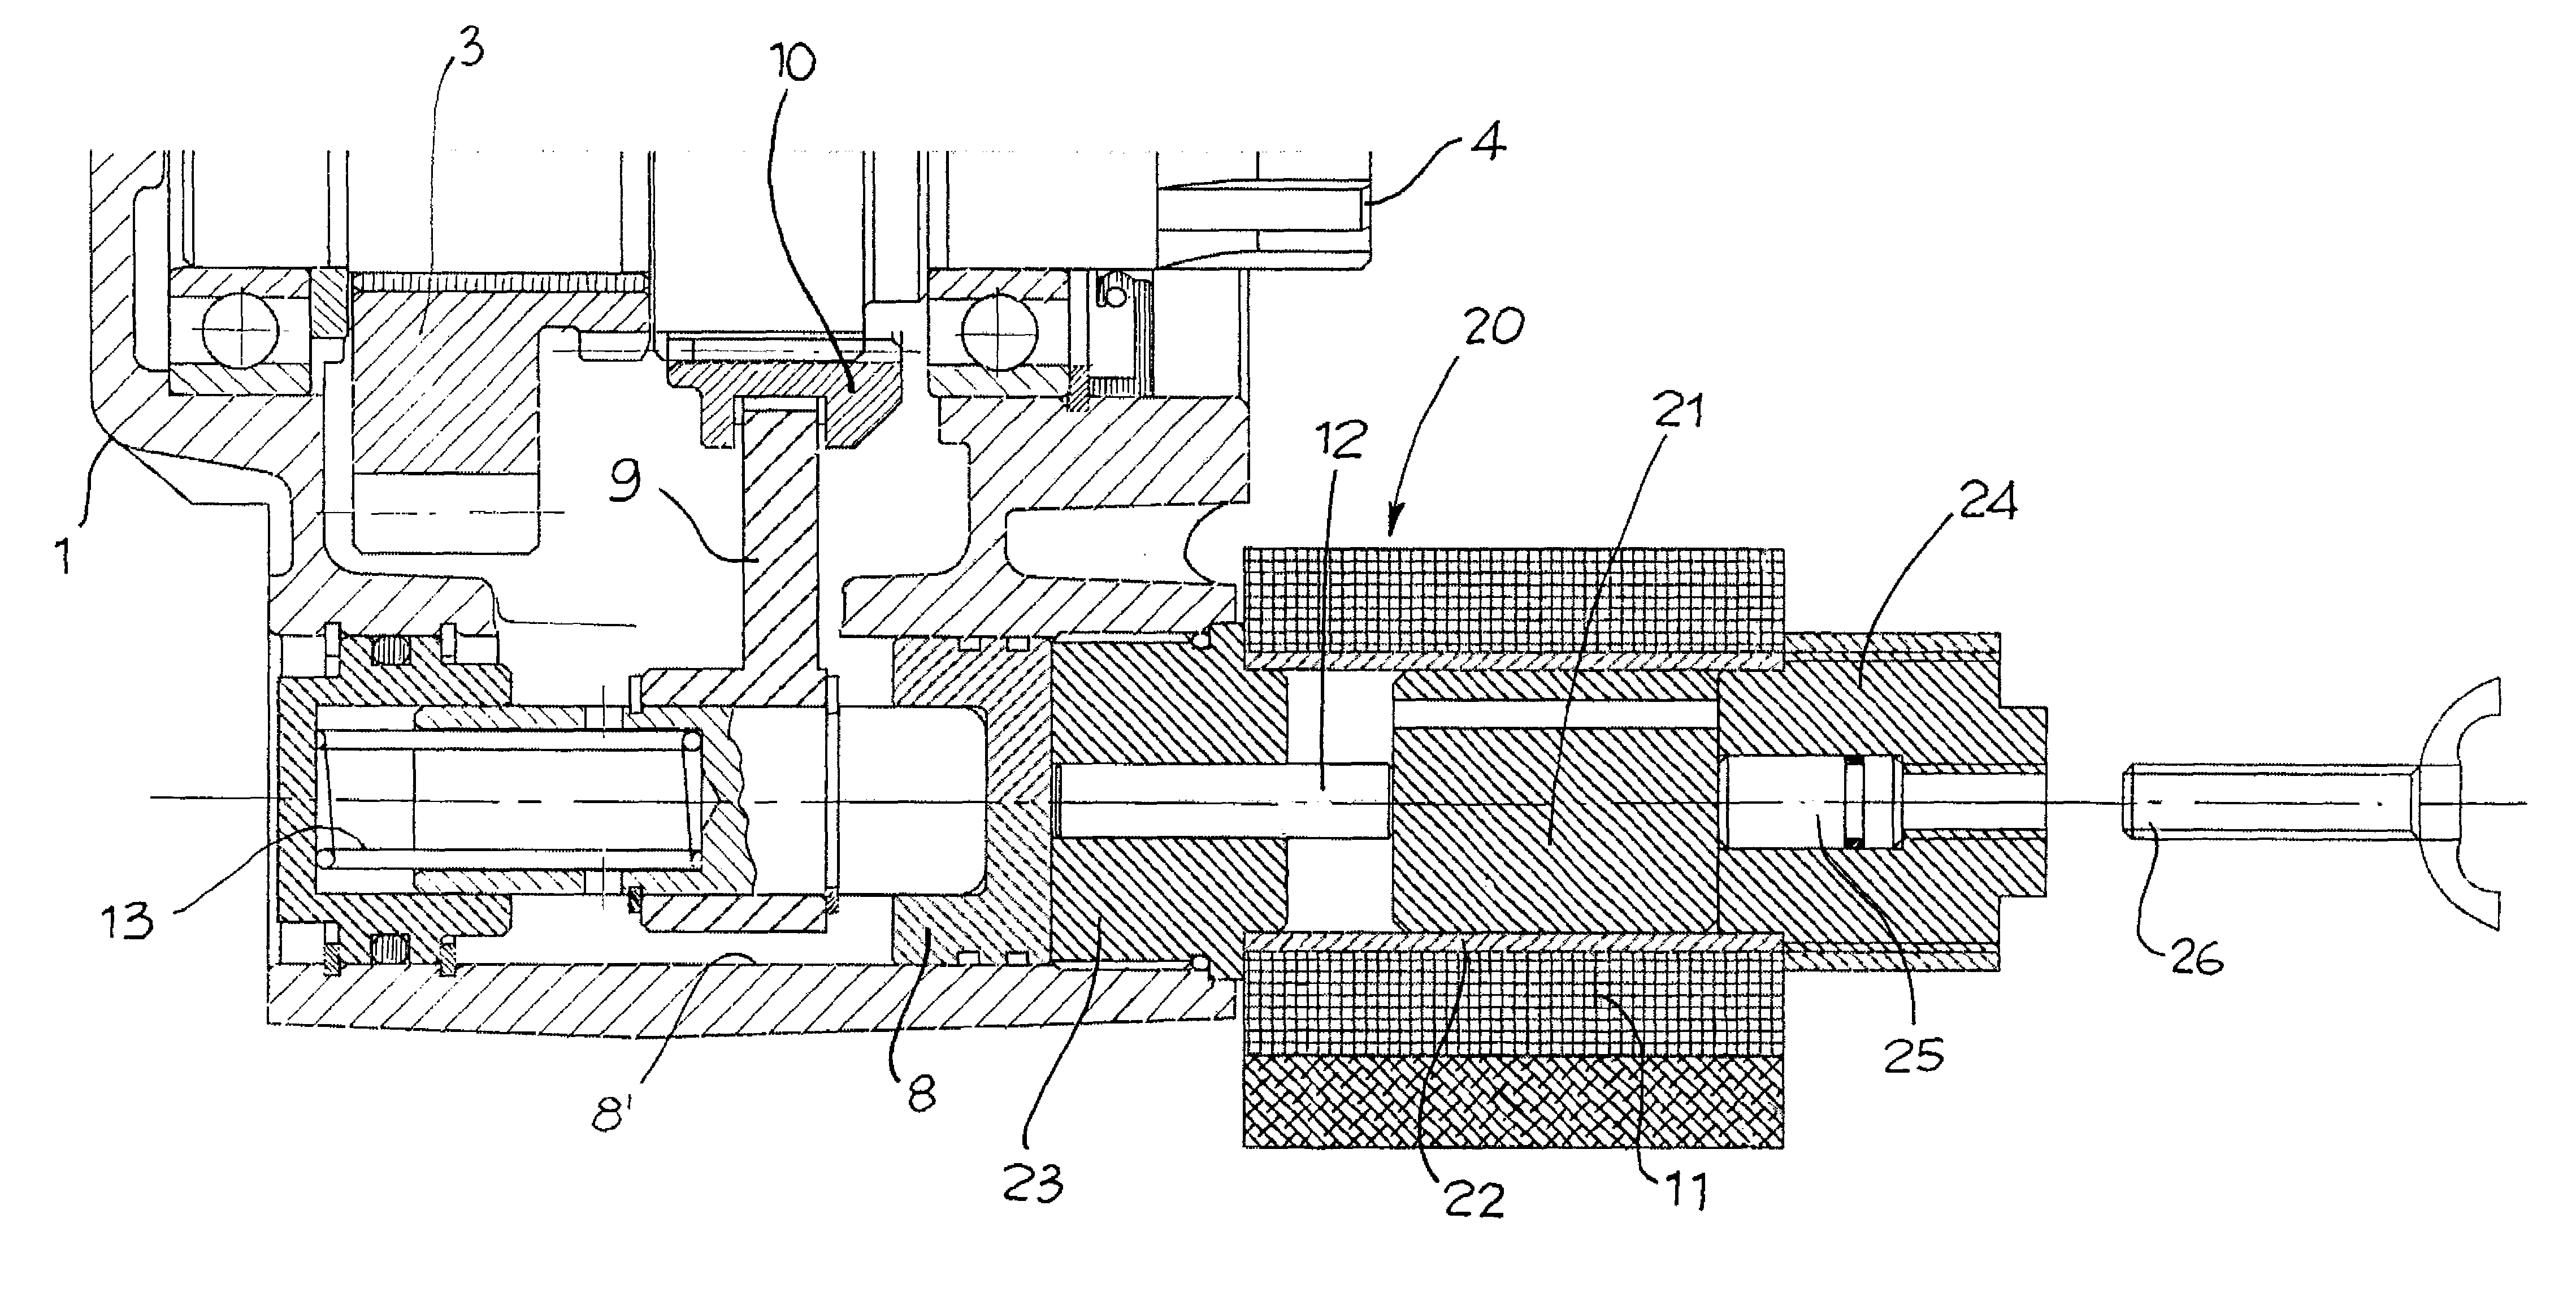 Solenoid device for engaging power takeoffs